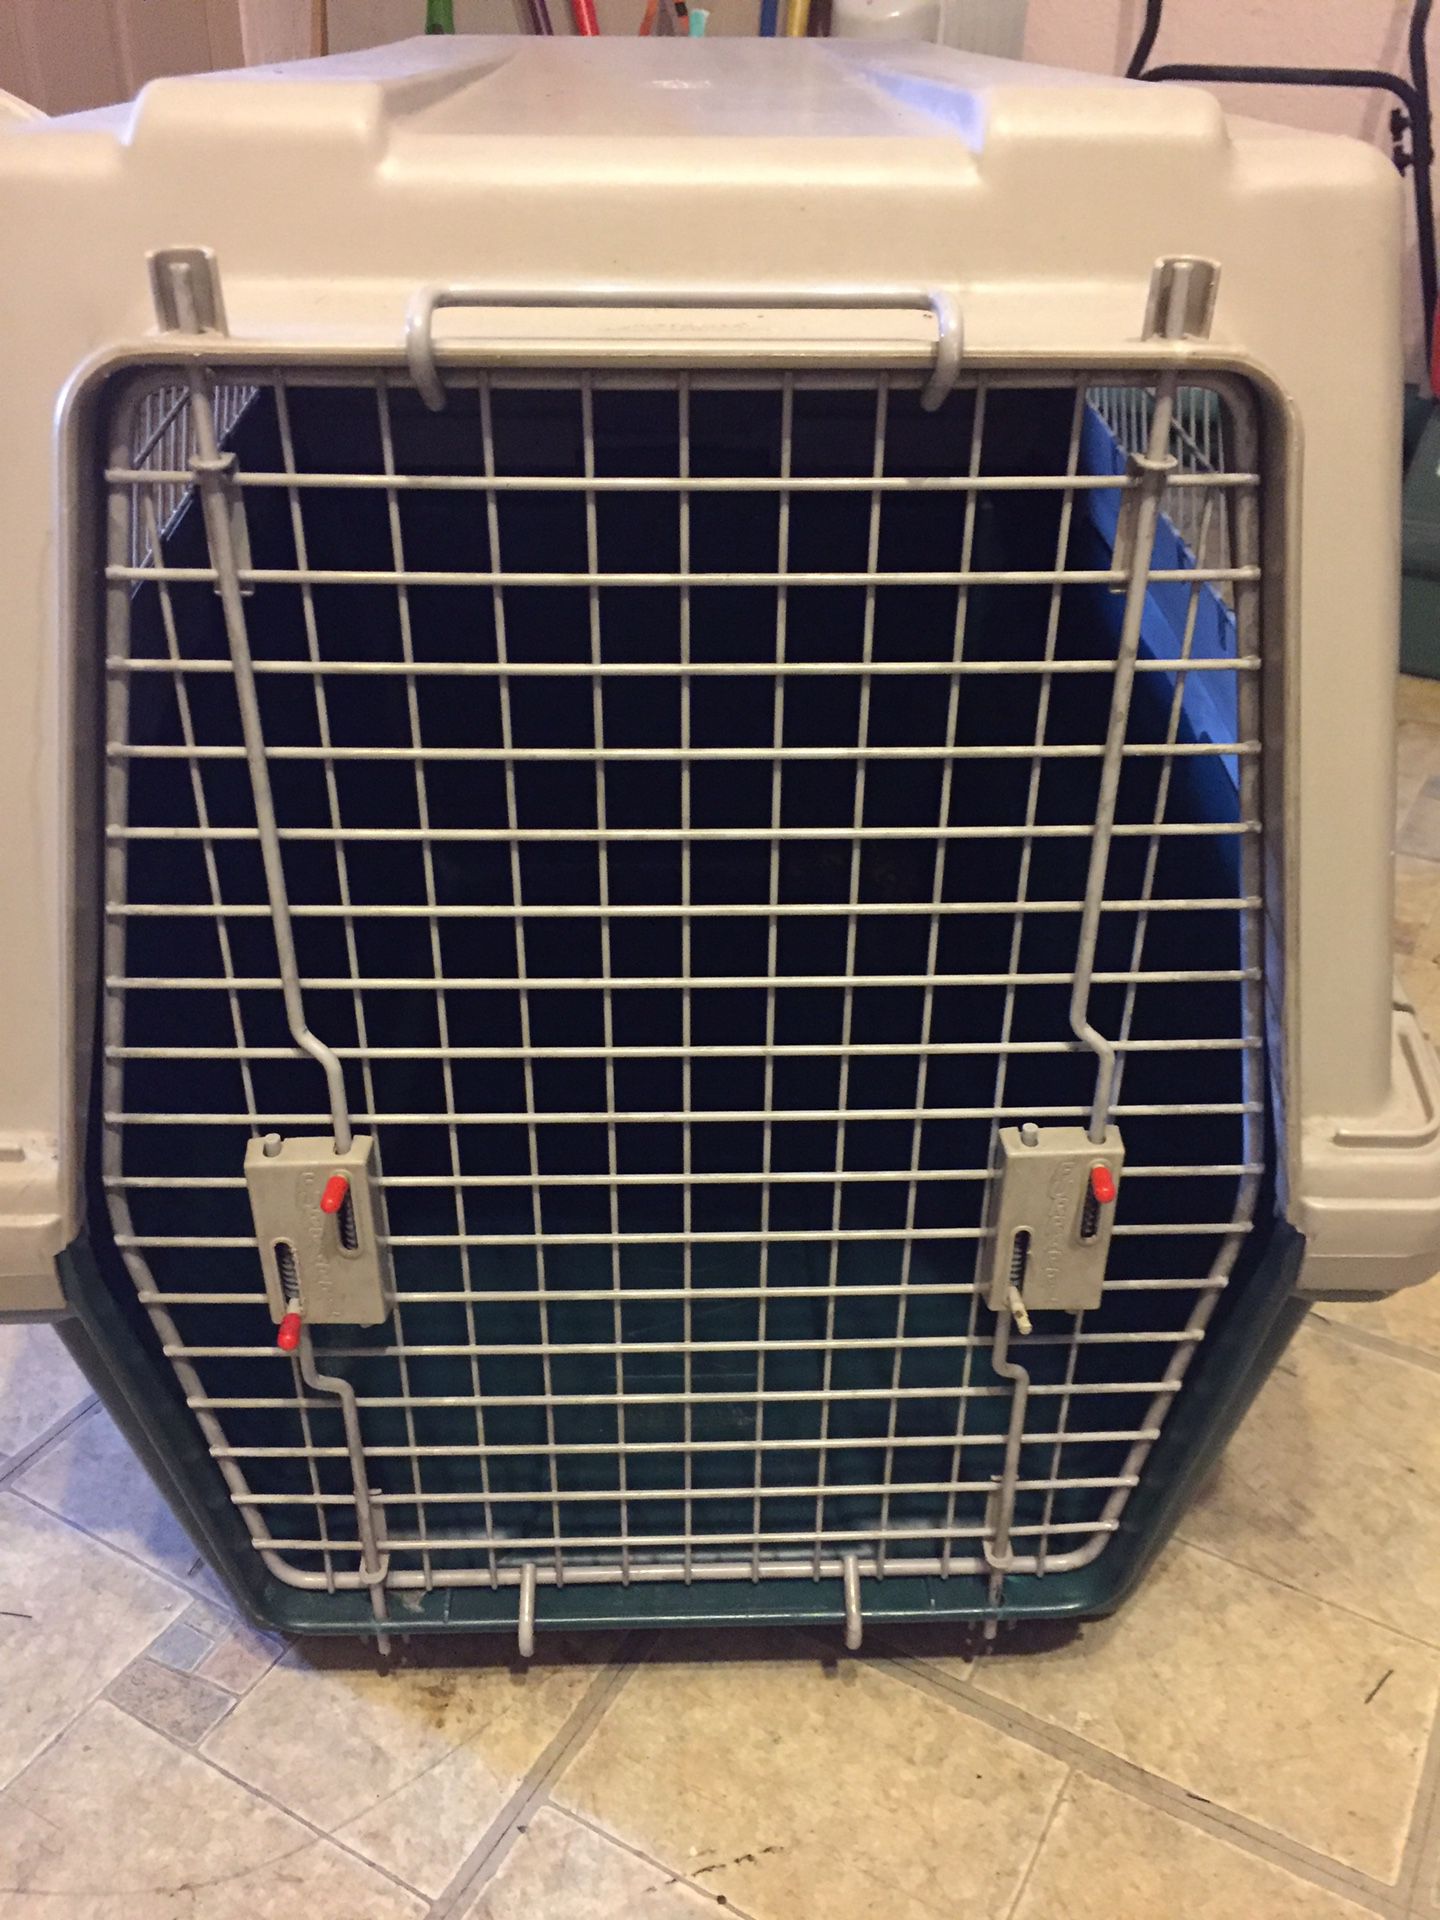 DOG KENNEL INTERMEDIATE SIZE FURRARI DOGLOO EXCELLENT CONDITION $50